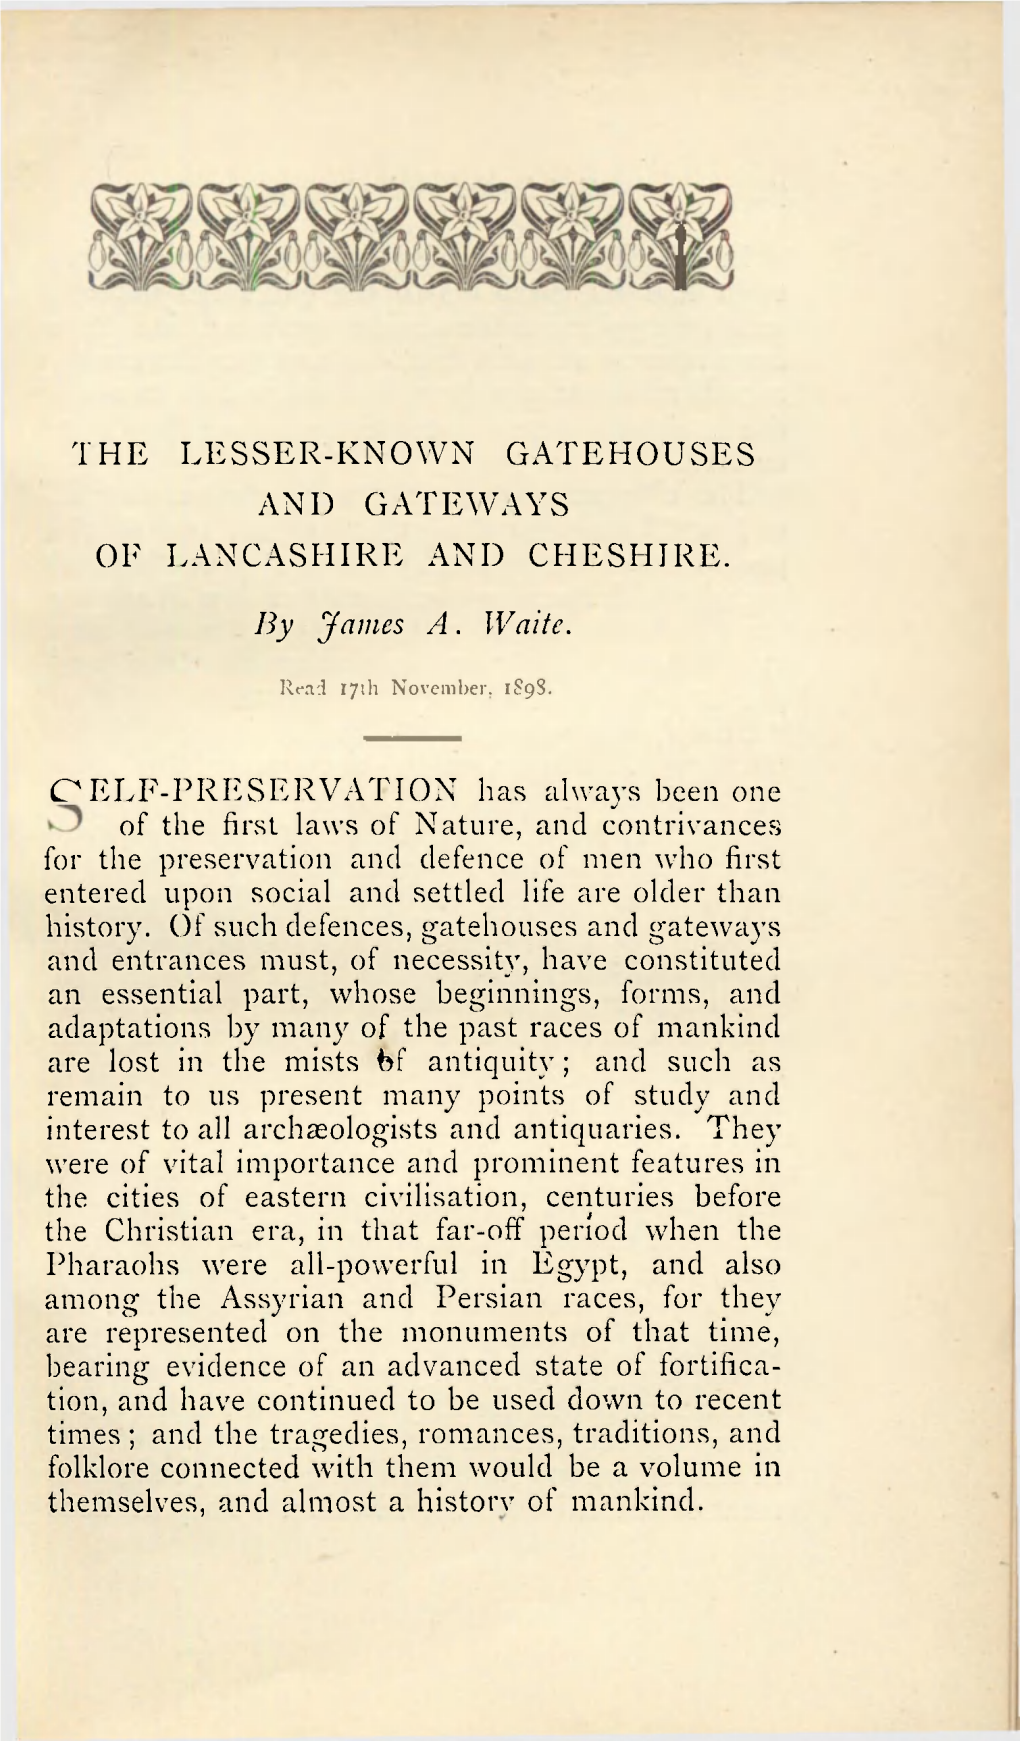 The Lesser-Known Gatehouses and Gateways of Lancashire and Cheshire